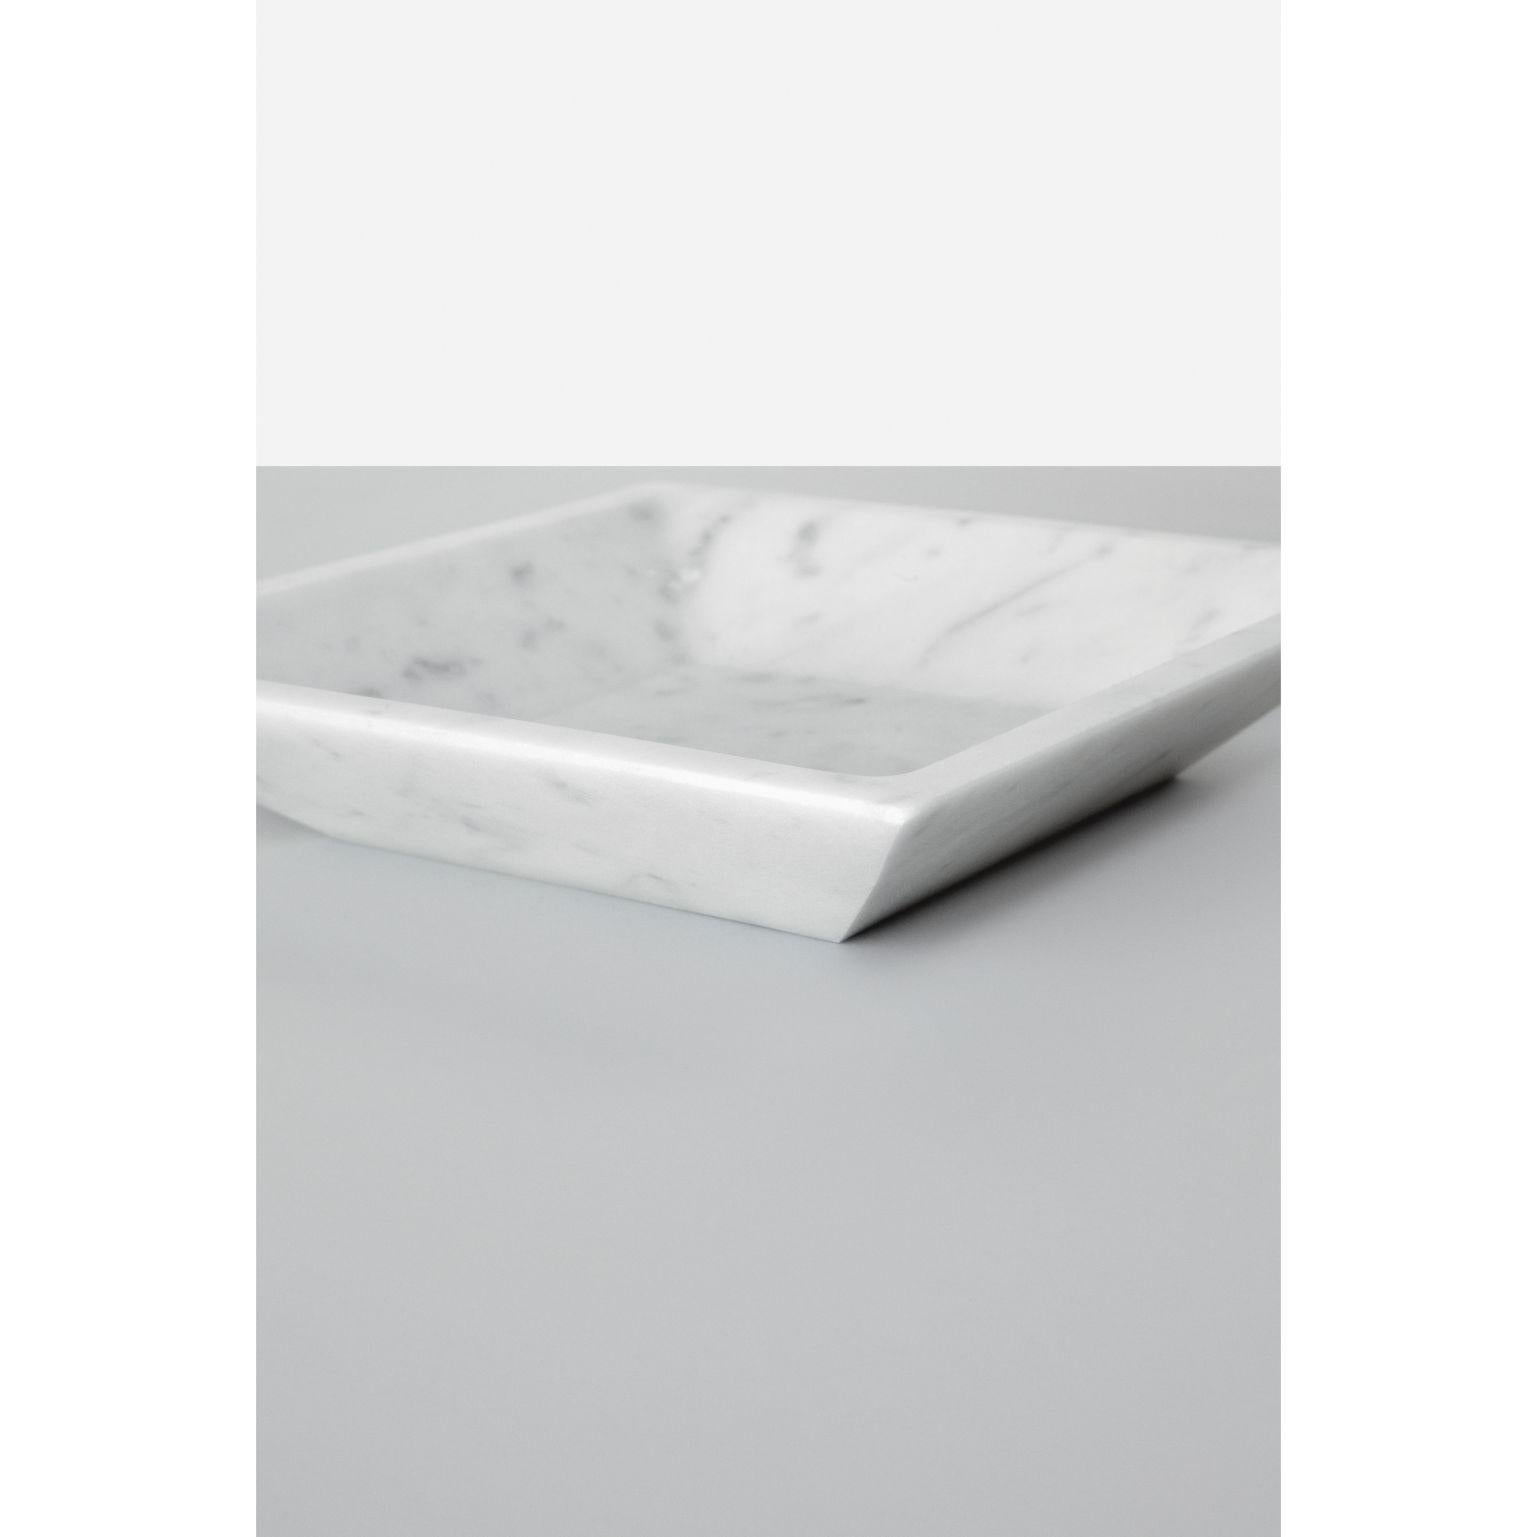 Square fondo plate by Studioformart
Total Marble Collection
Dimensions: 20 x 20 x 4 cm
Materials: Bianco Carrara

The history of marble carving is lost in time; in one breath, it takes us back to the IV century BC, to ancient Greece where